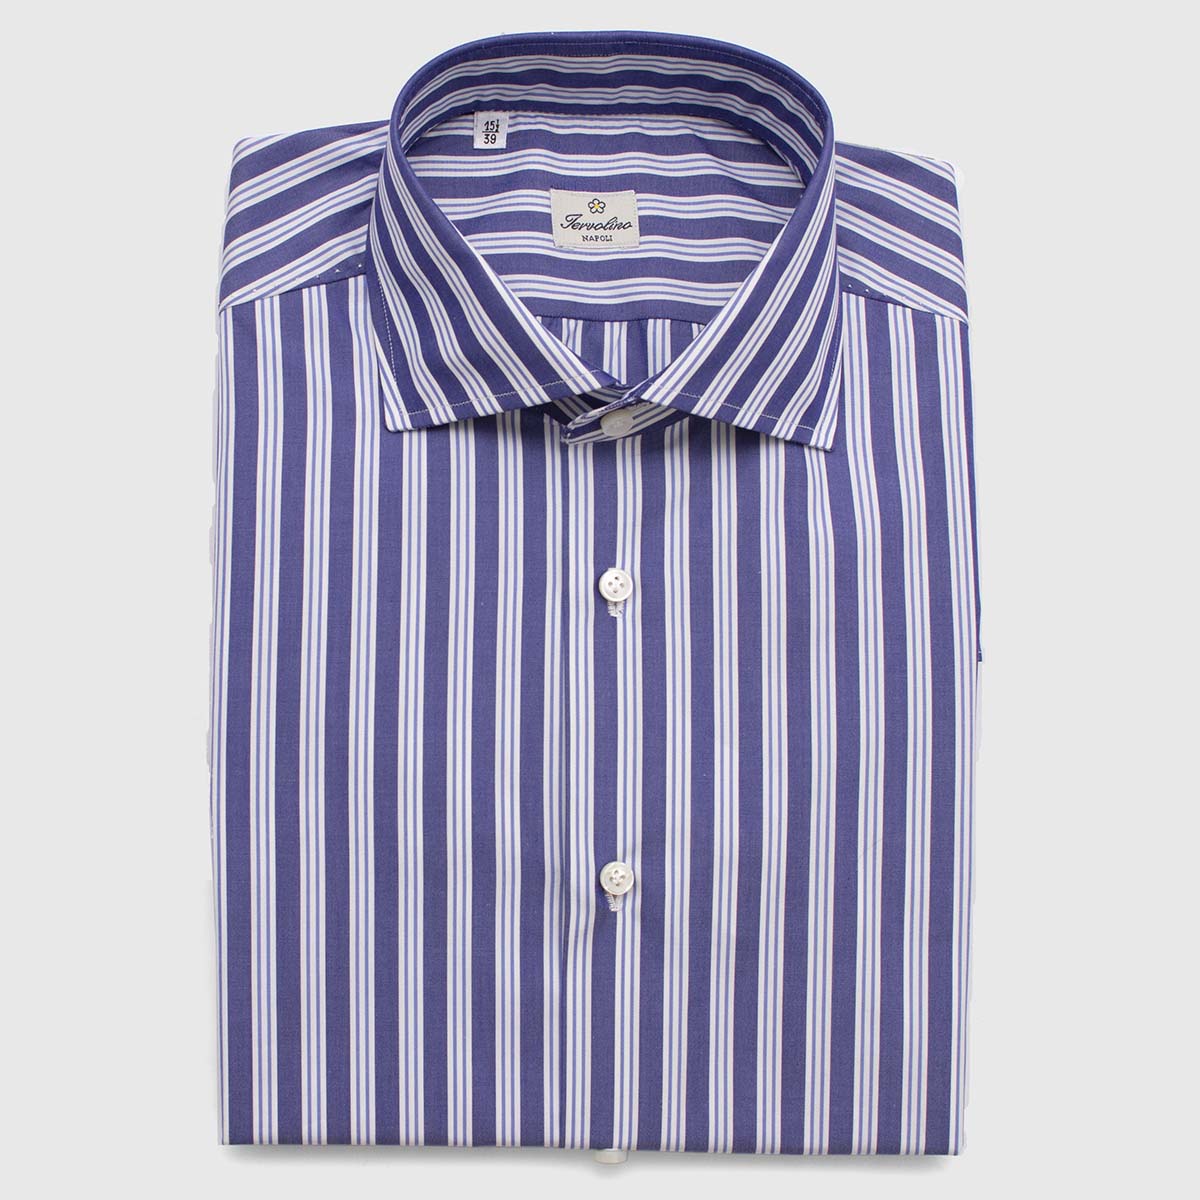 100% Blue and white striped Cotton shirt made in 12 hand-made steps Sartoria Iervolino on sale 2022 2